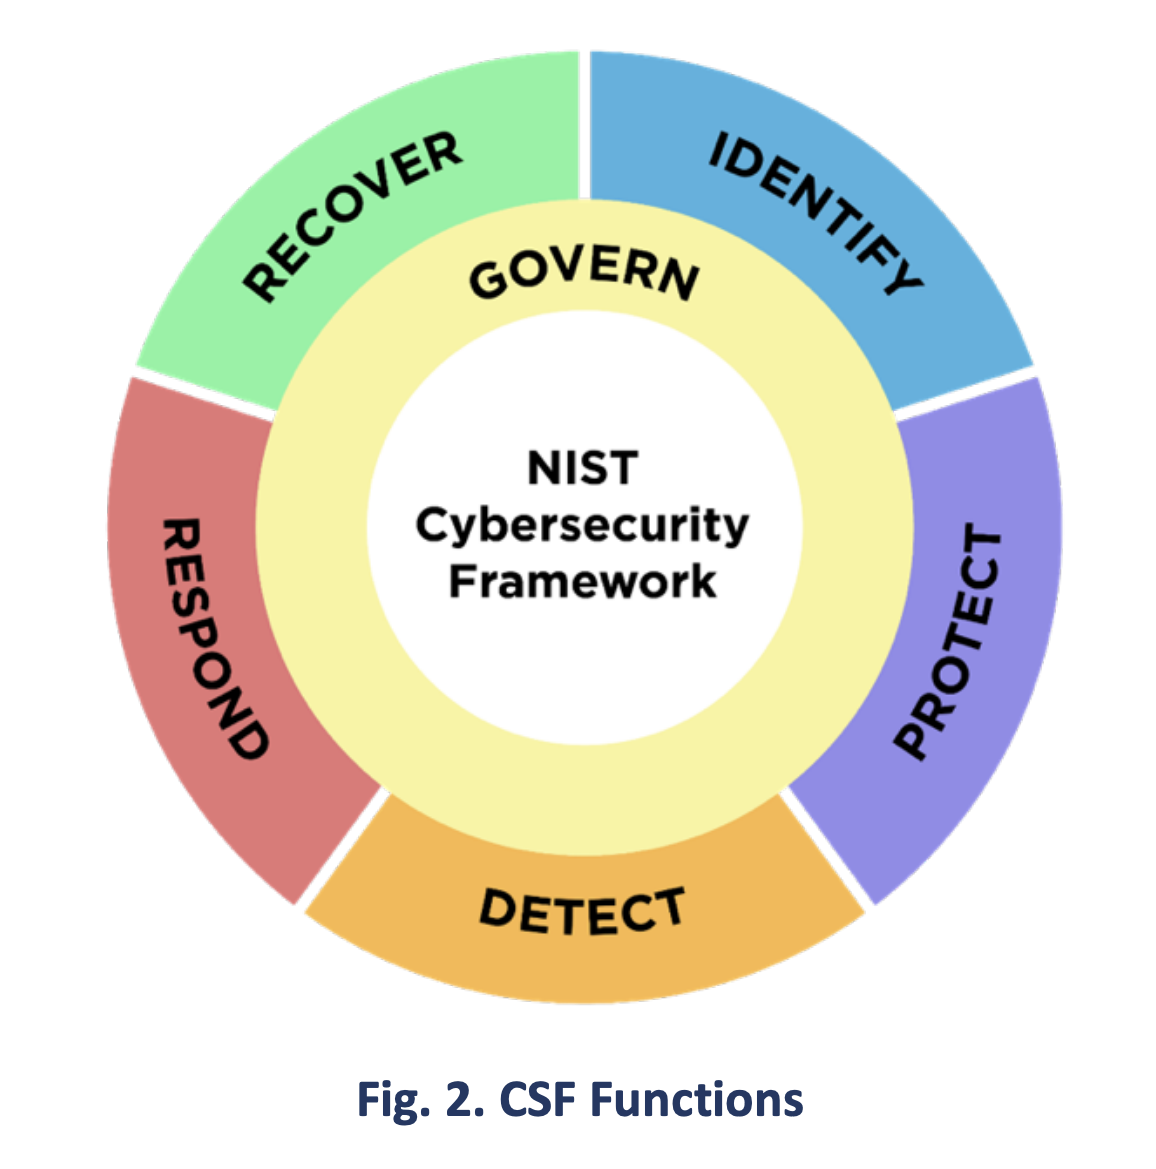 A graphic from the NIST CSF 2.0. The graphic is in the shape of a wheel labeled "NIST Cybersecurity Framework." The center circle of the wheel is labeled "Govern." Circling it is another circle divided into 5 differently colored sections, labeled, "Identify, Protect, Detect, Respond, Recover." Underneath the graphic is the caption, "Fig. 2. CSF Functions."